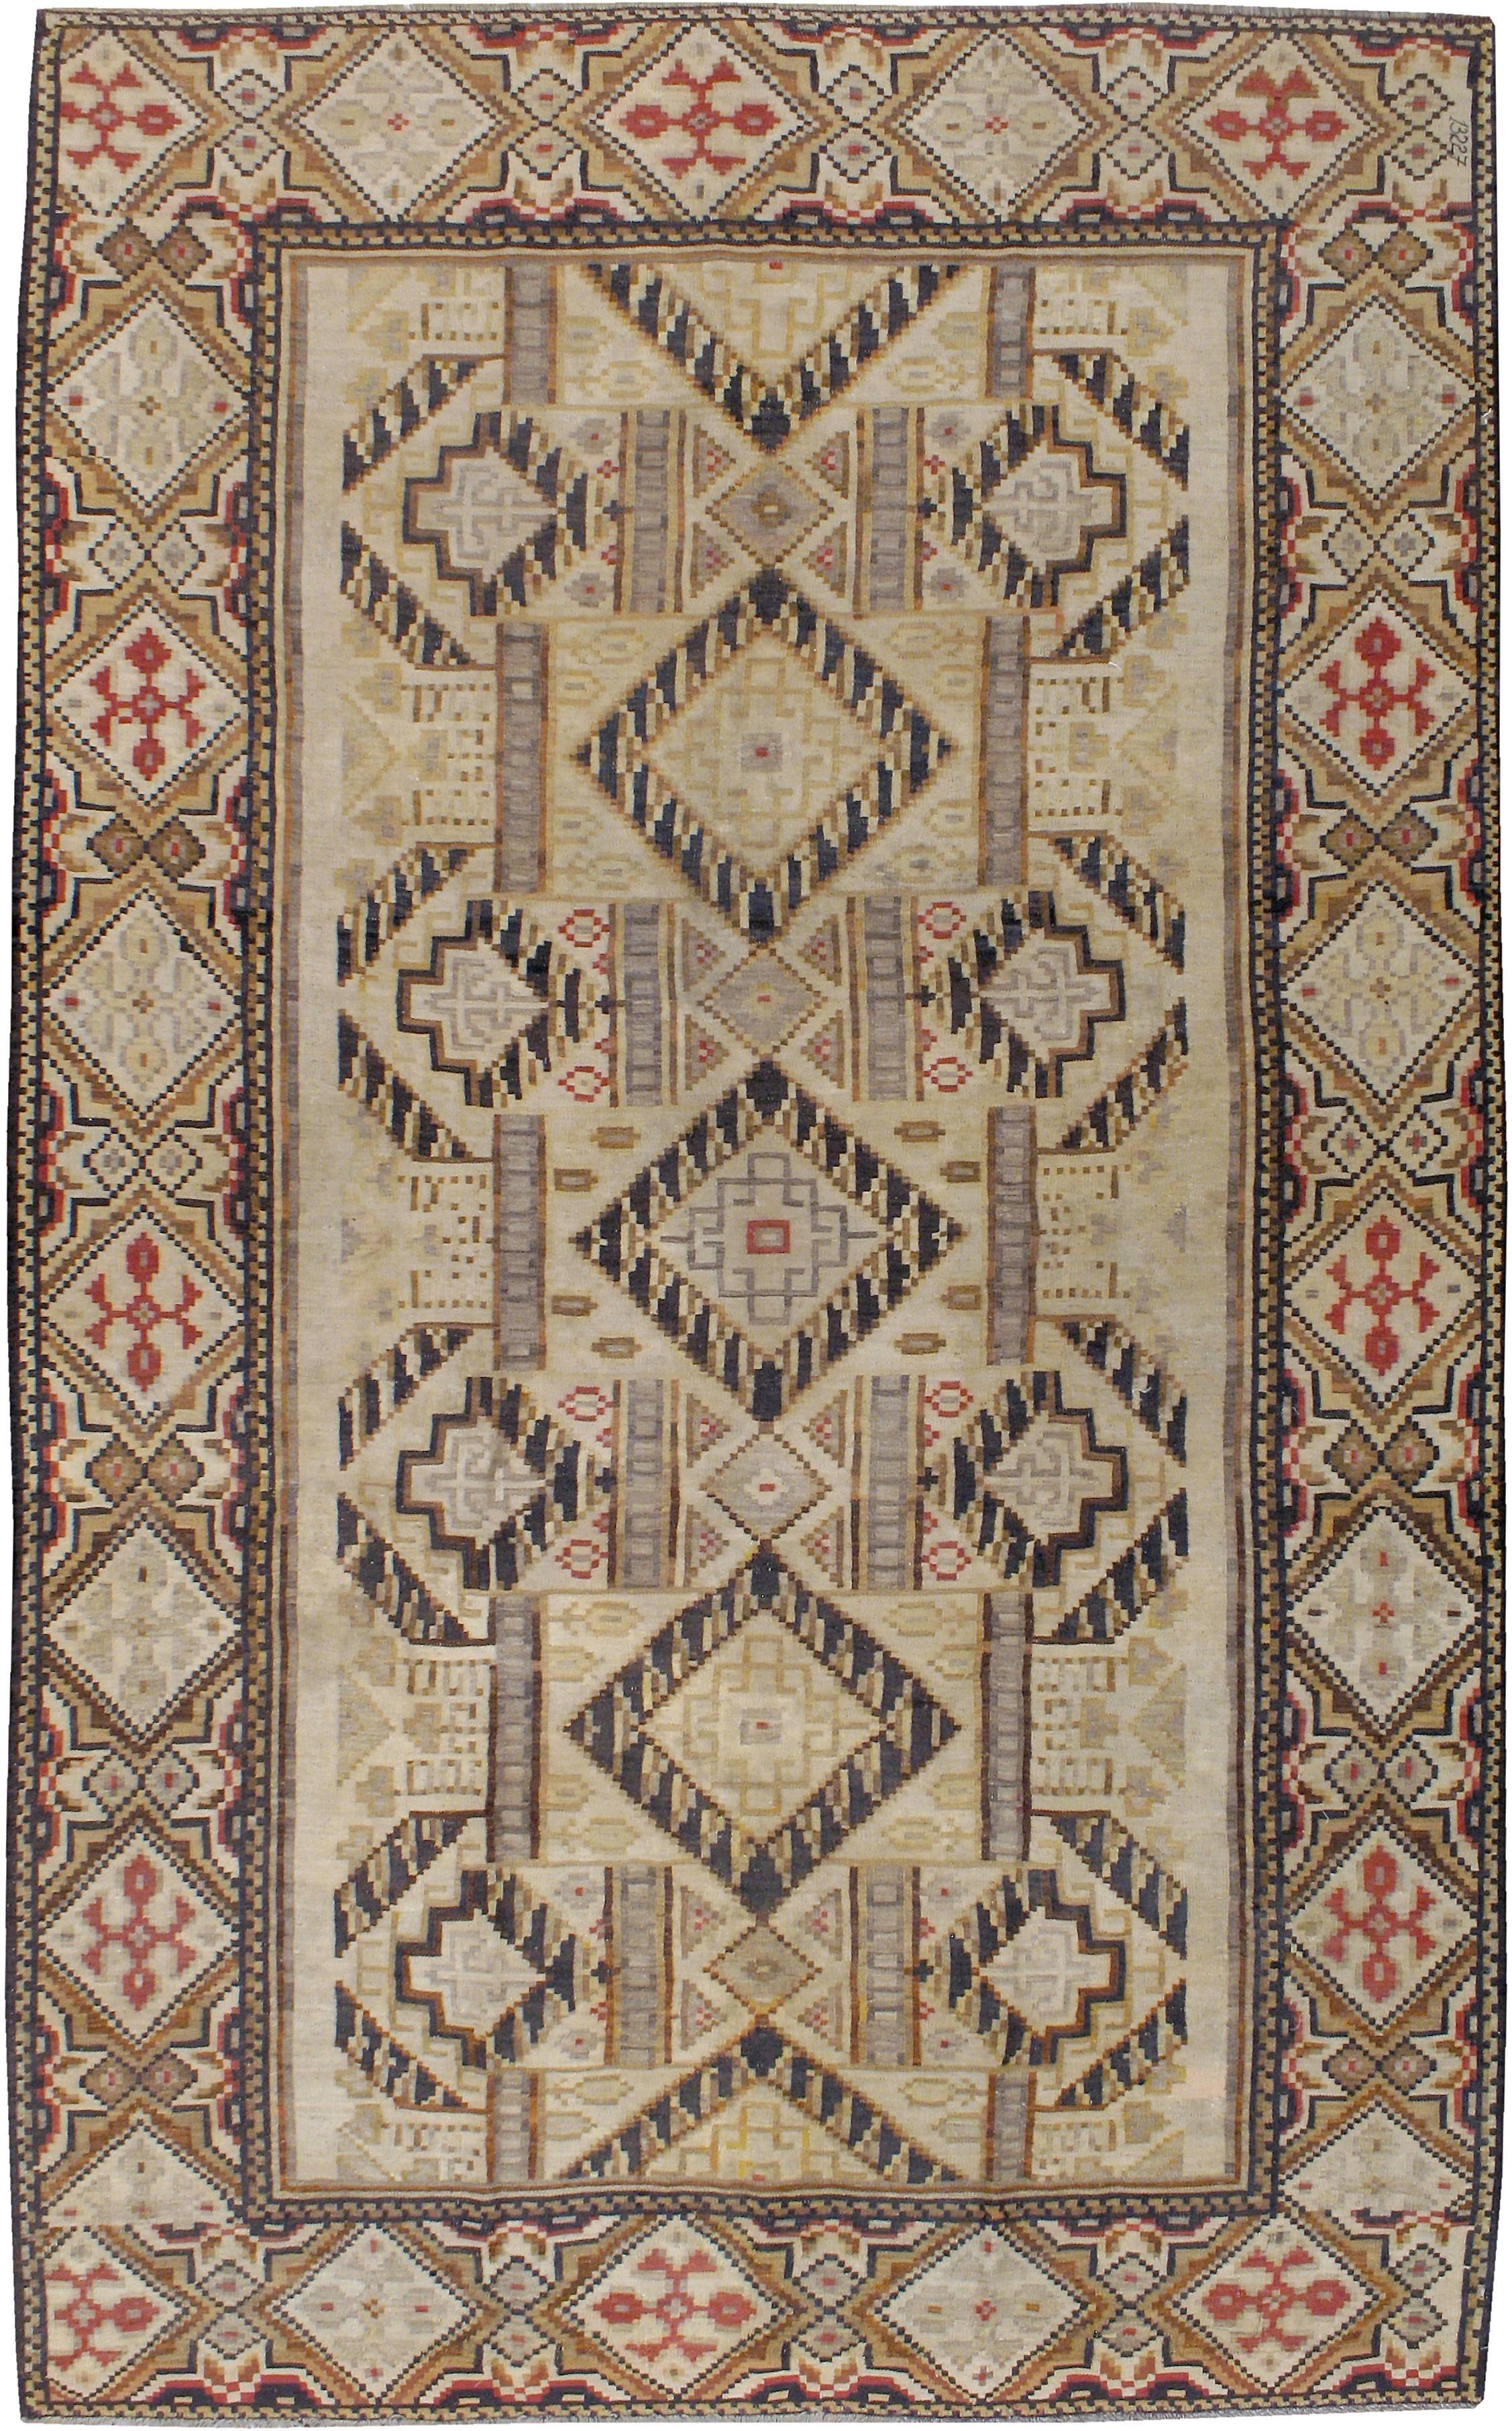 An antique Russian Bessarabian flat-woven Kilim carpet from the first quarter of the 20th century.